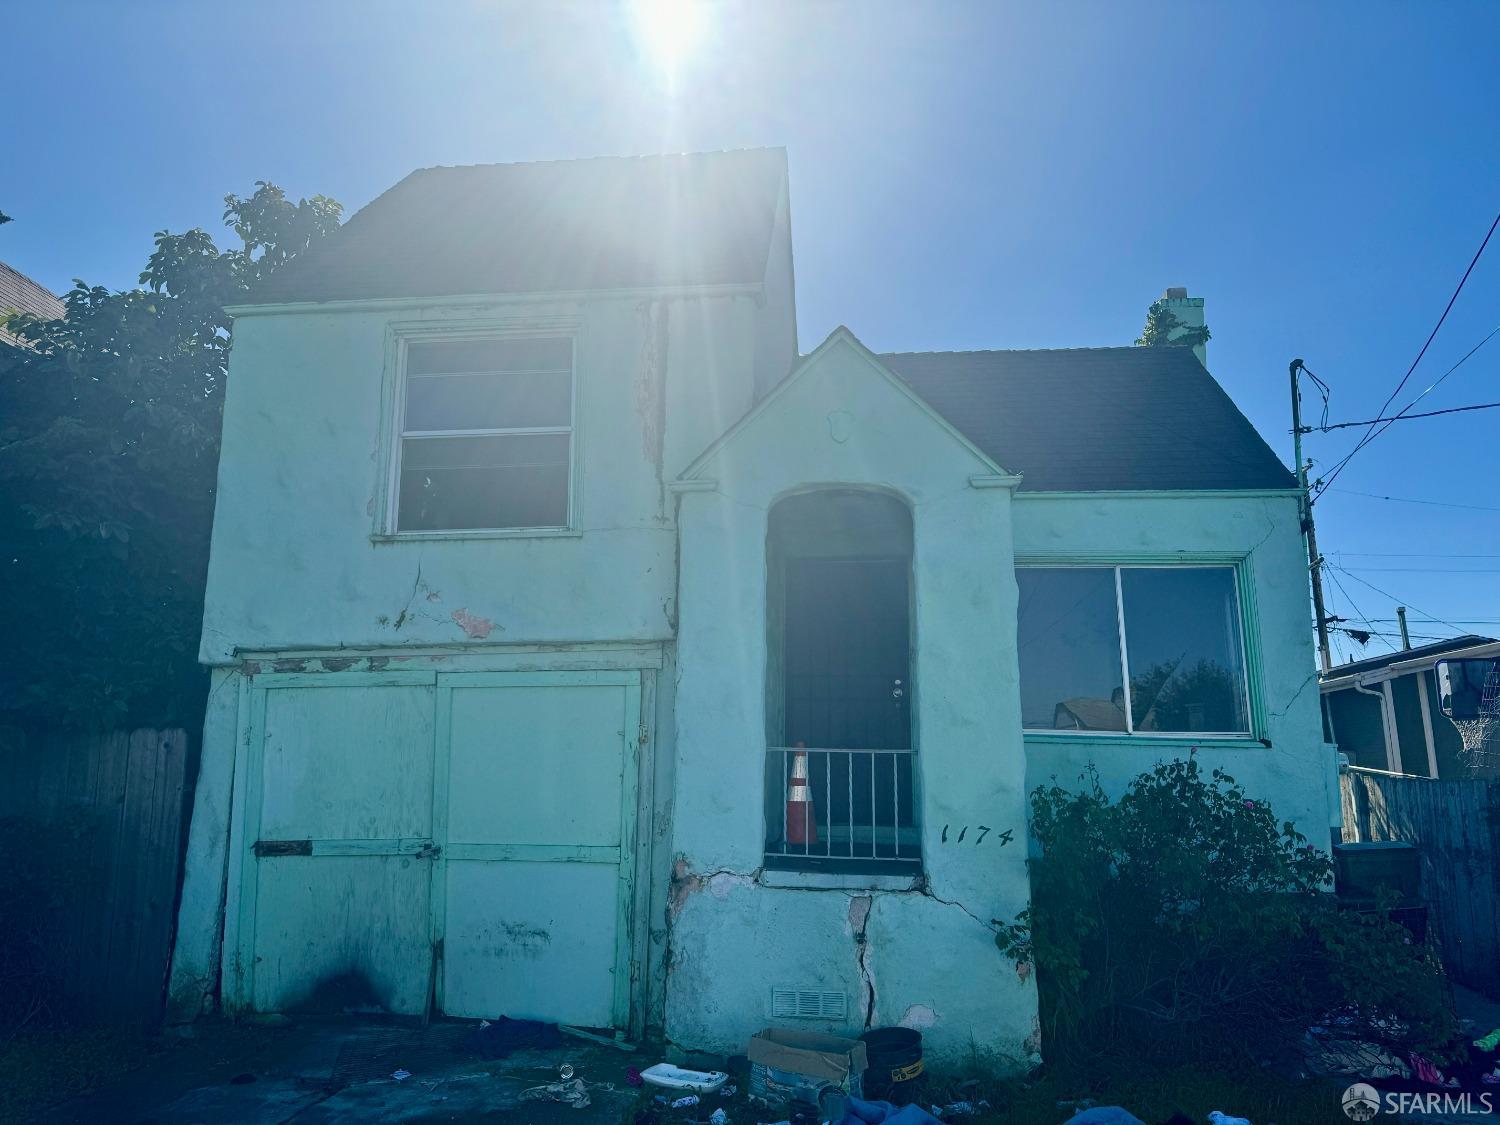 Photo of 1174 77th Ave in Oakland, CA